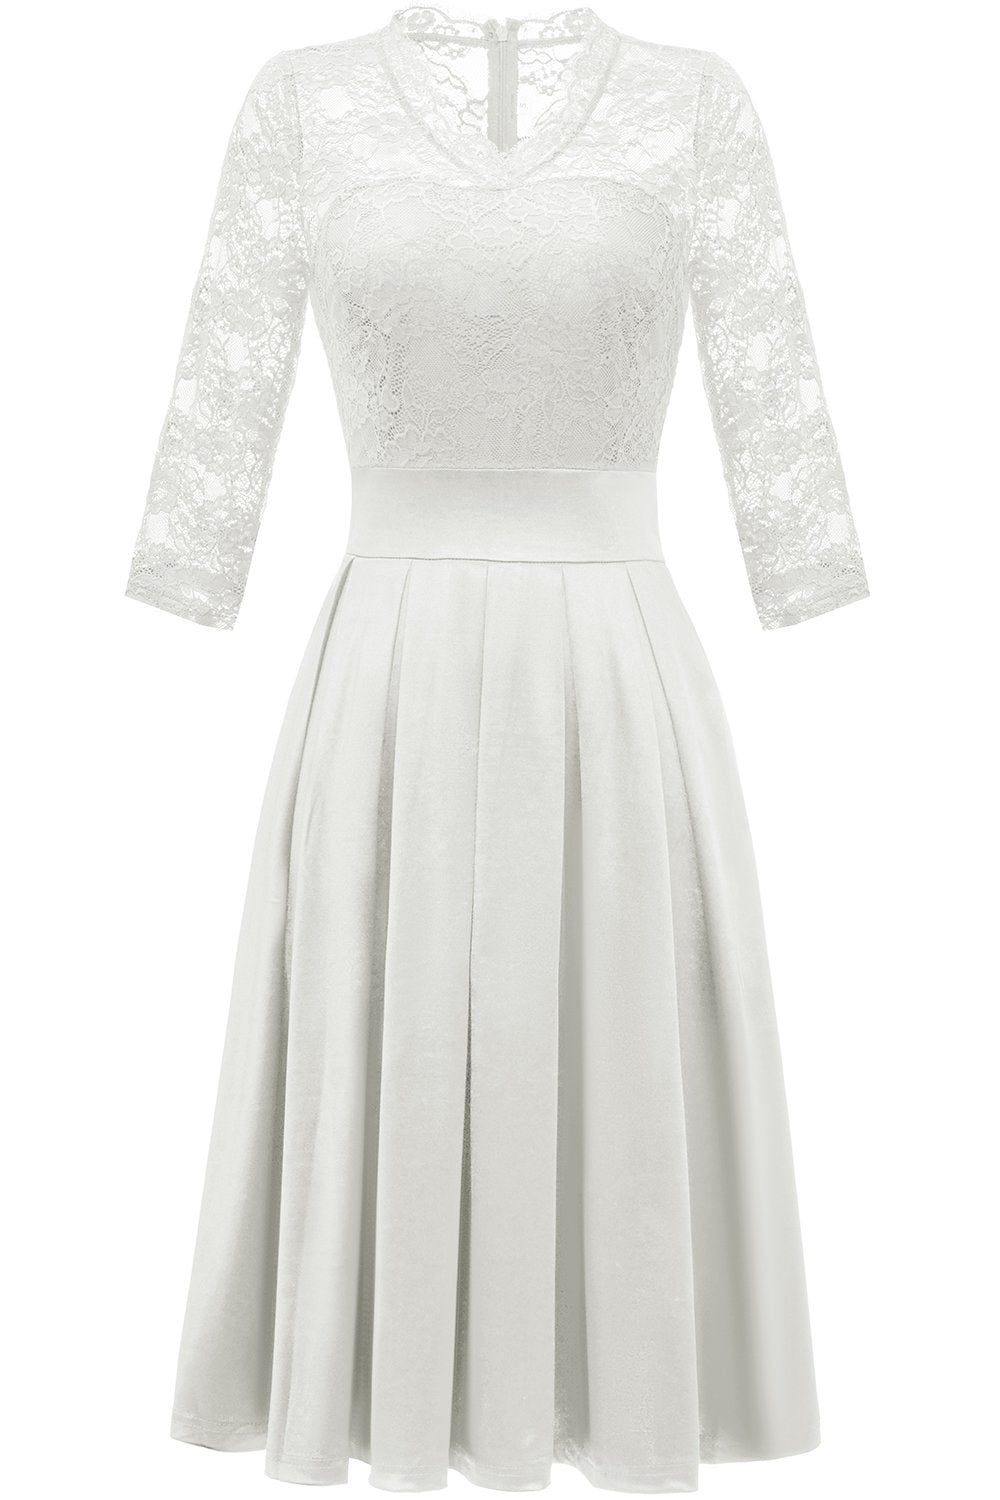 White Lace Formal Dress with Sleeves